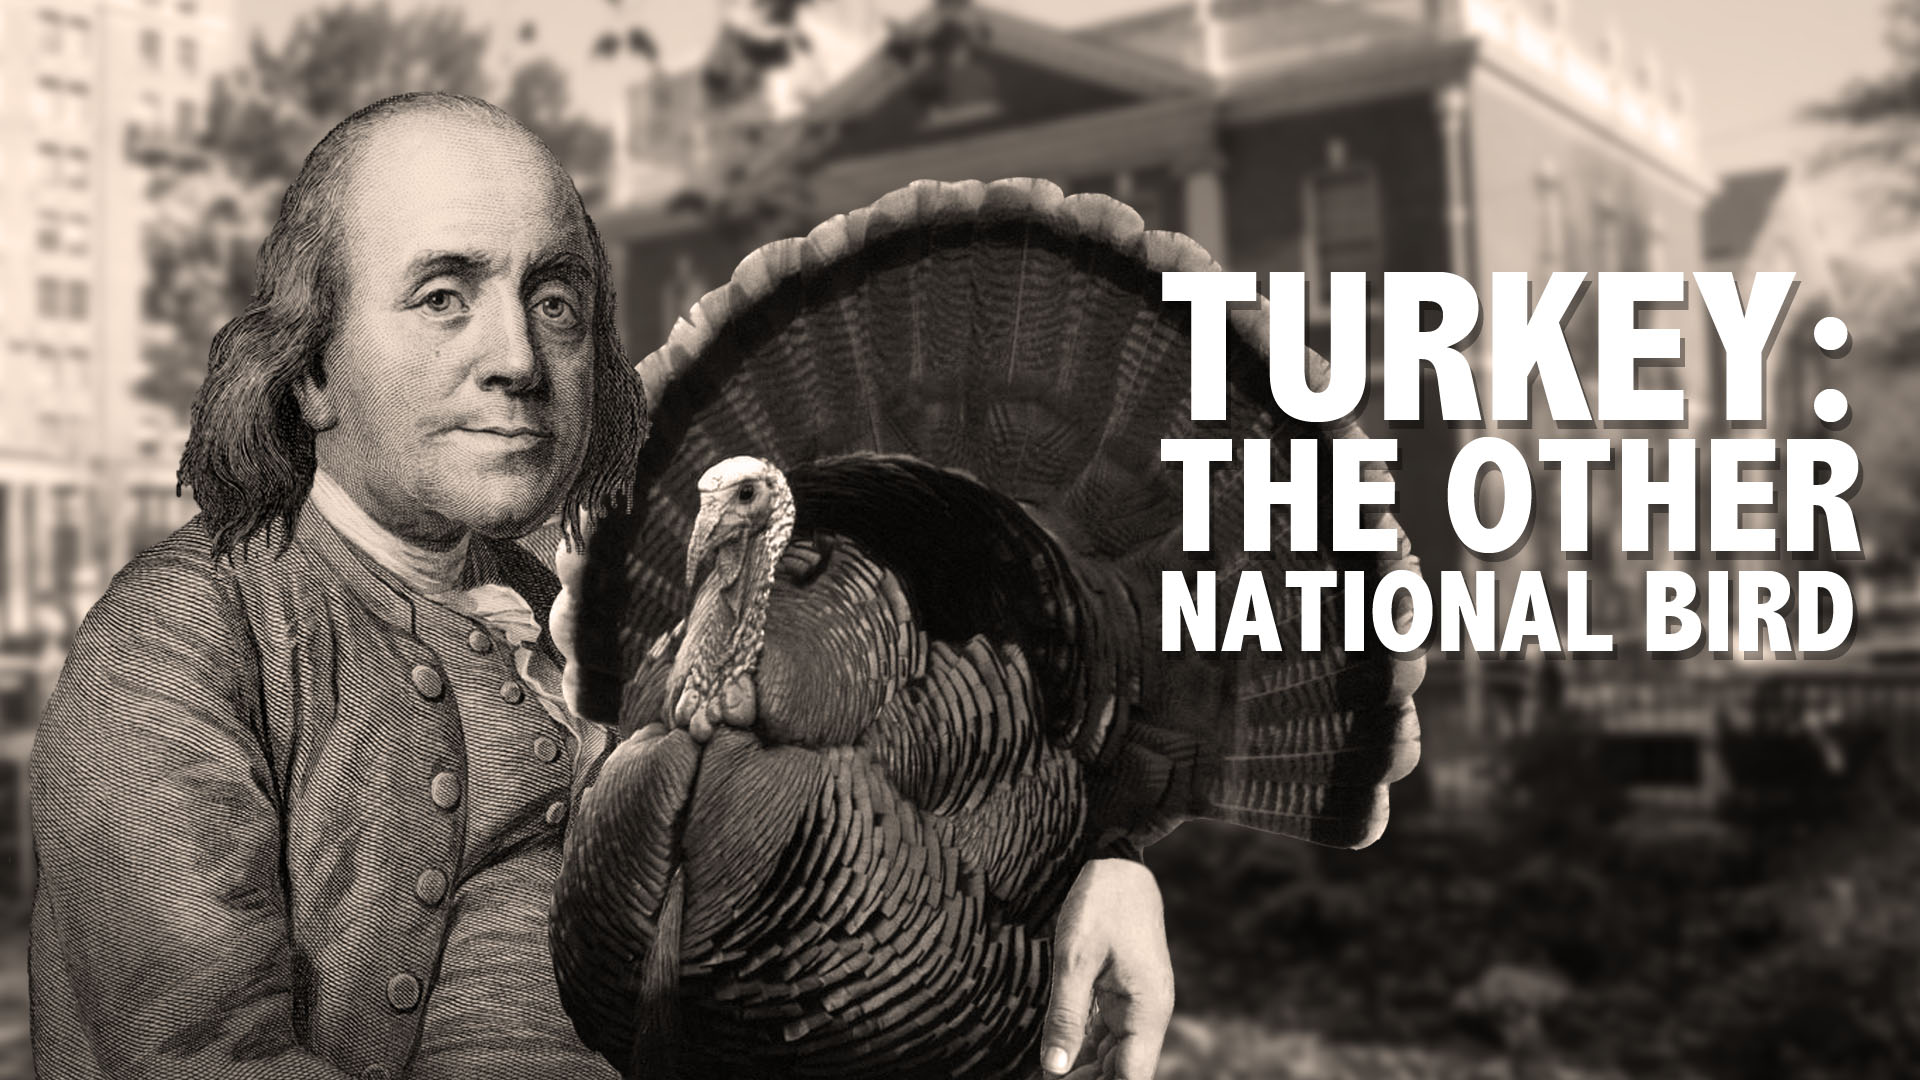 Benjamin Franklin did not propose the wild turkey as the symbol for the United States instead of the bald eagle. He once wrote a private letter to his daughter expressing his dislike of the eagle and preference for the turkey, but never expressed that sentiment publicly. More info on <a href="http://www.slate.com/articles/health_and_science/holidays/2013/11/benjamin_franklin_turkey_symbol_why_he_hated_the_bald_eagle_for_the_great.html" target="_blank">Slate</a>.